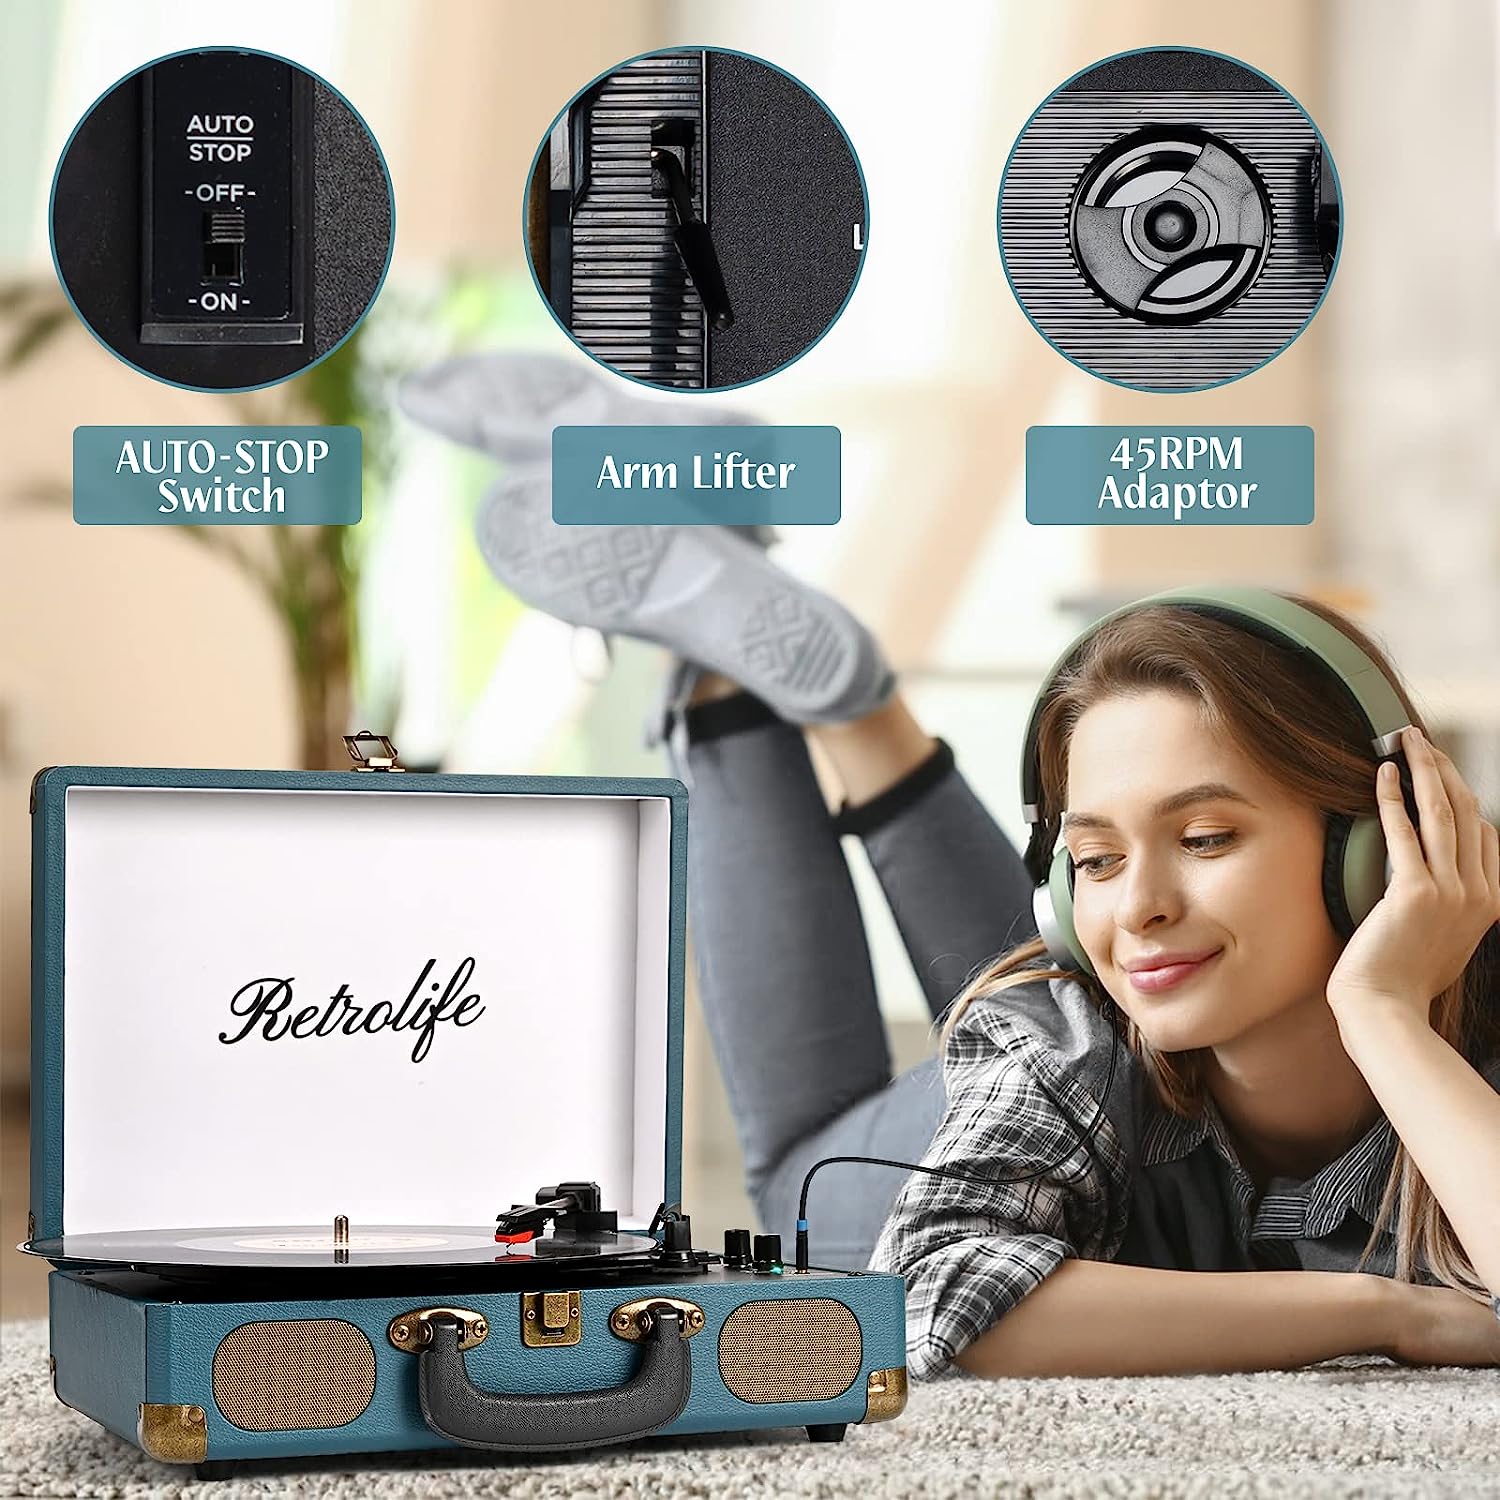 Vinyl Account Player 3-Speed Bluetooth Suitcase Portable Belt-Driven Report Player with Built-in Speakers RCA Line Out AUX in Headphone Jack Vintage Turntable